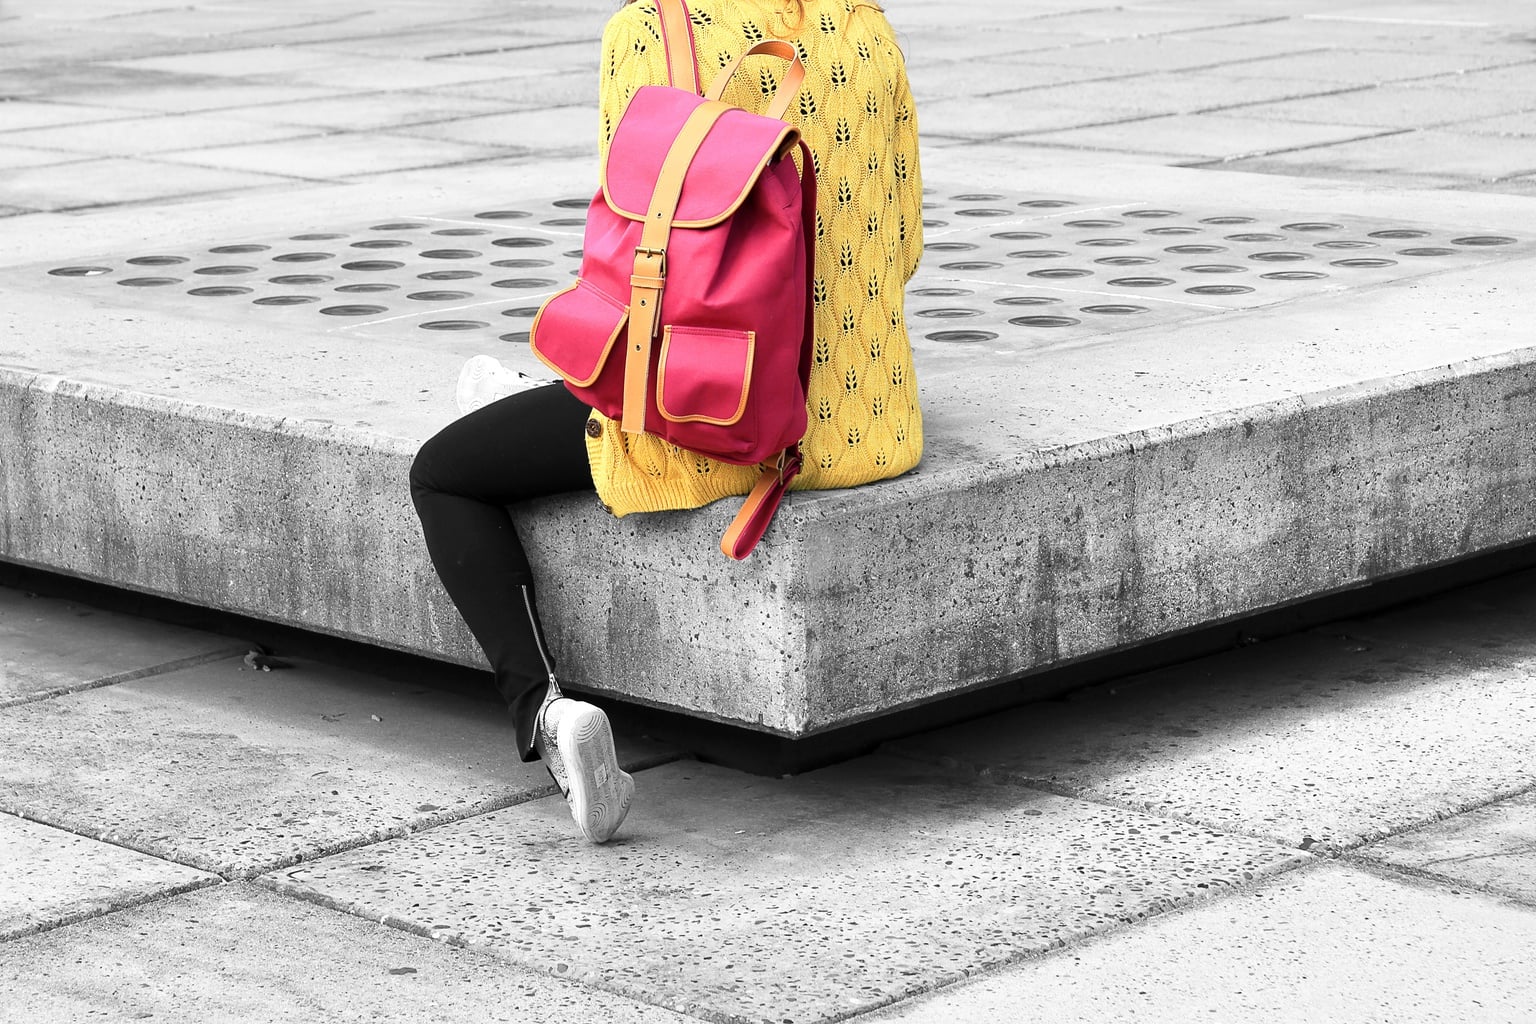 Student with a pink backpack